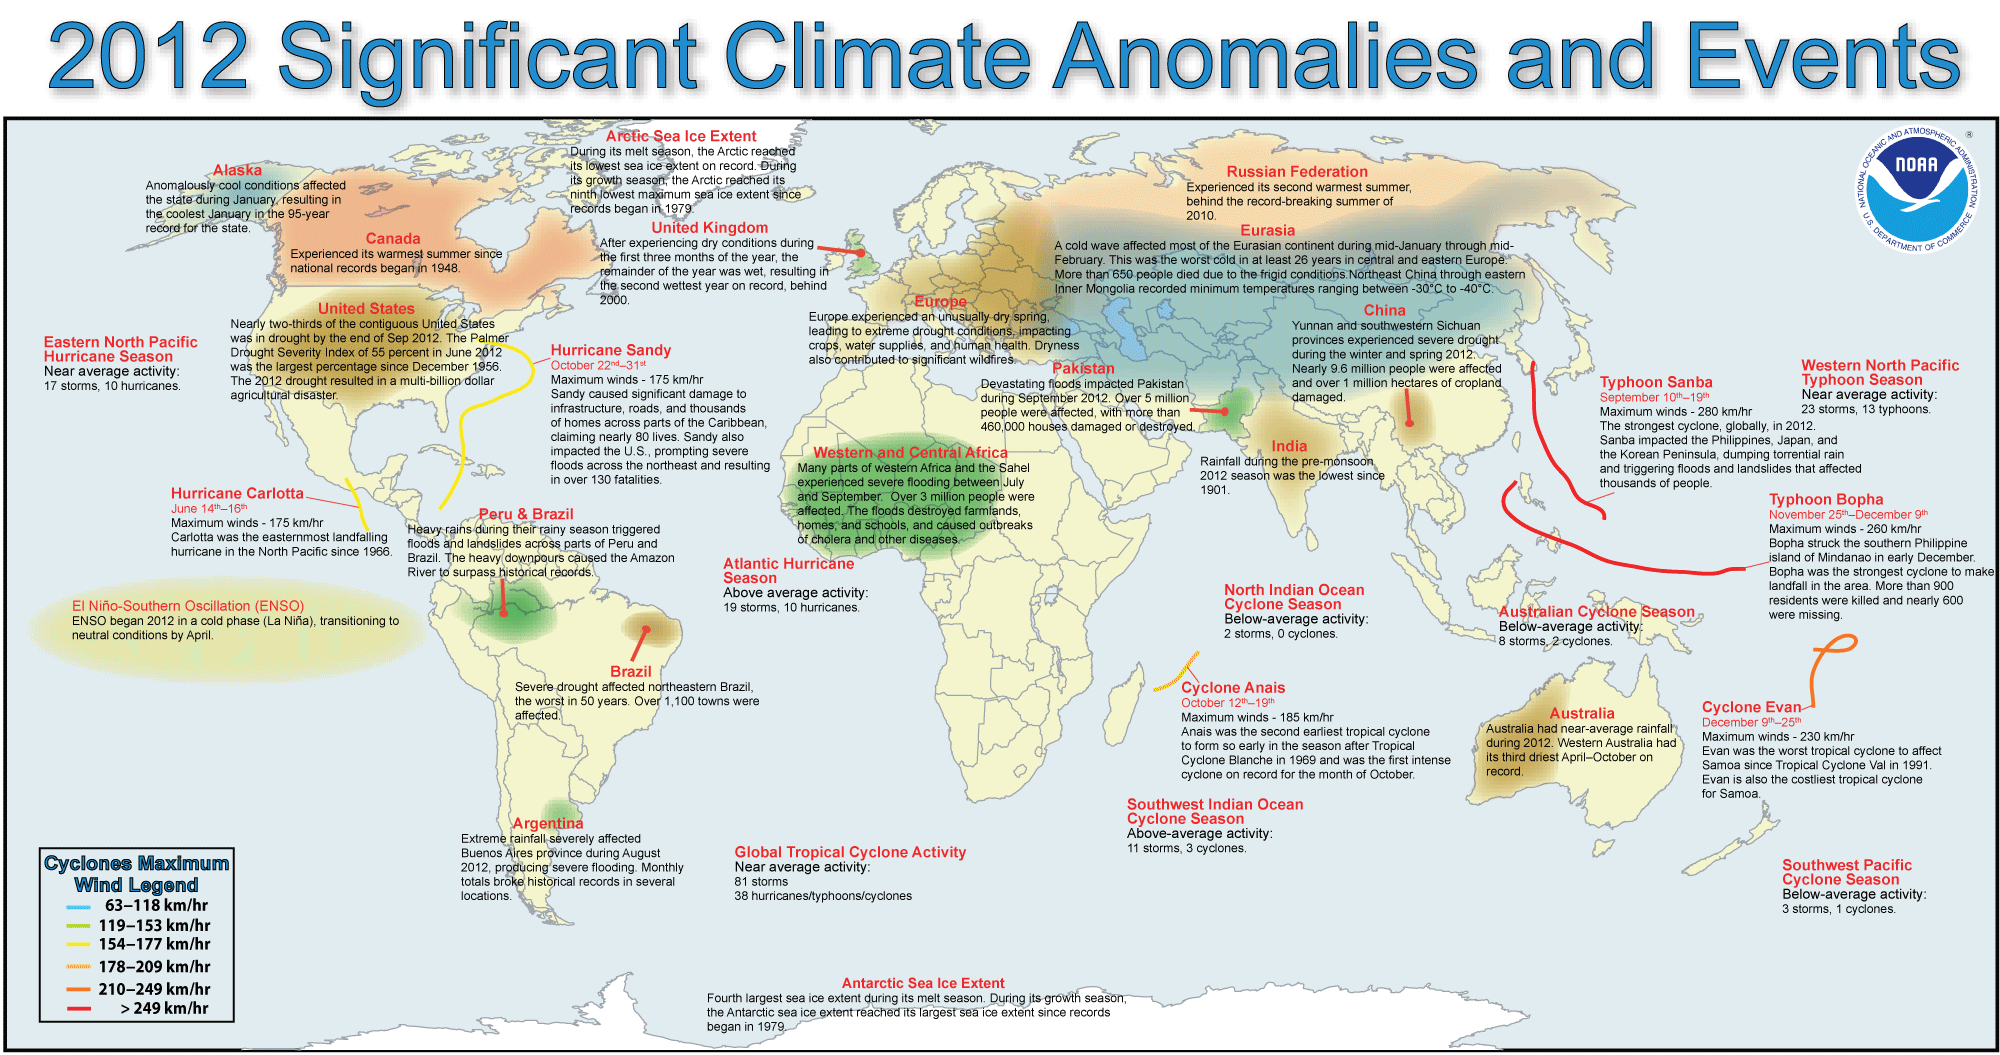 2012 significant global anomalies